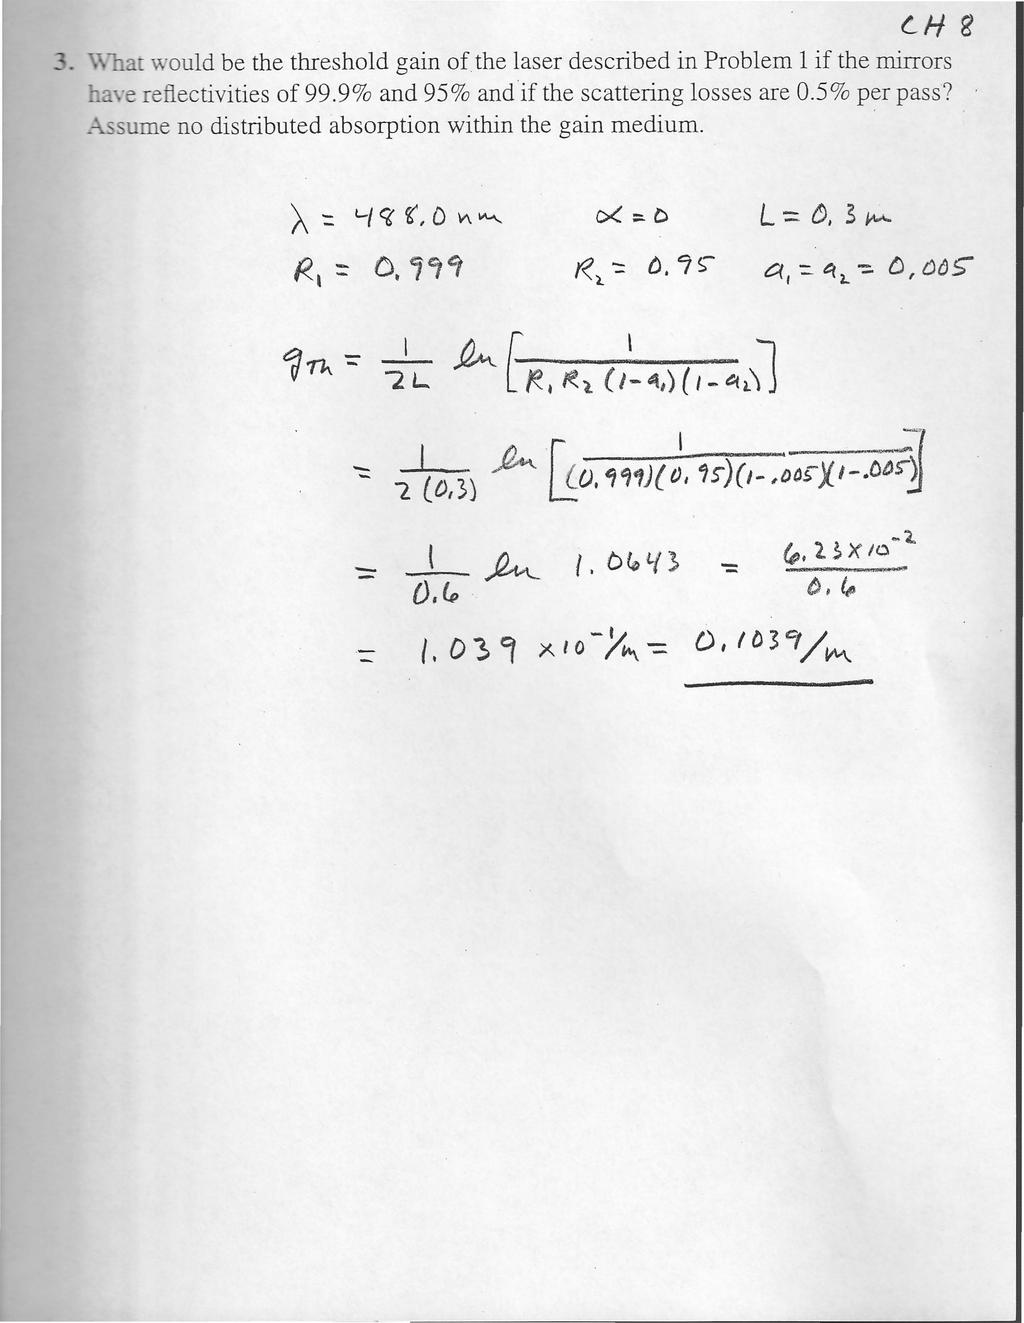 t_h g \ ould be the threshold gain of the laser described in Problem 1 if the mirrors ~~ e refiectivities of 99.9o/o and 95% and if the scattering losses are 0.5% per pass?